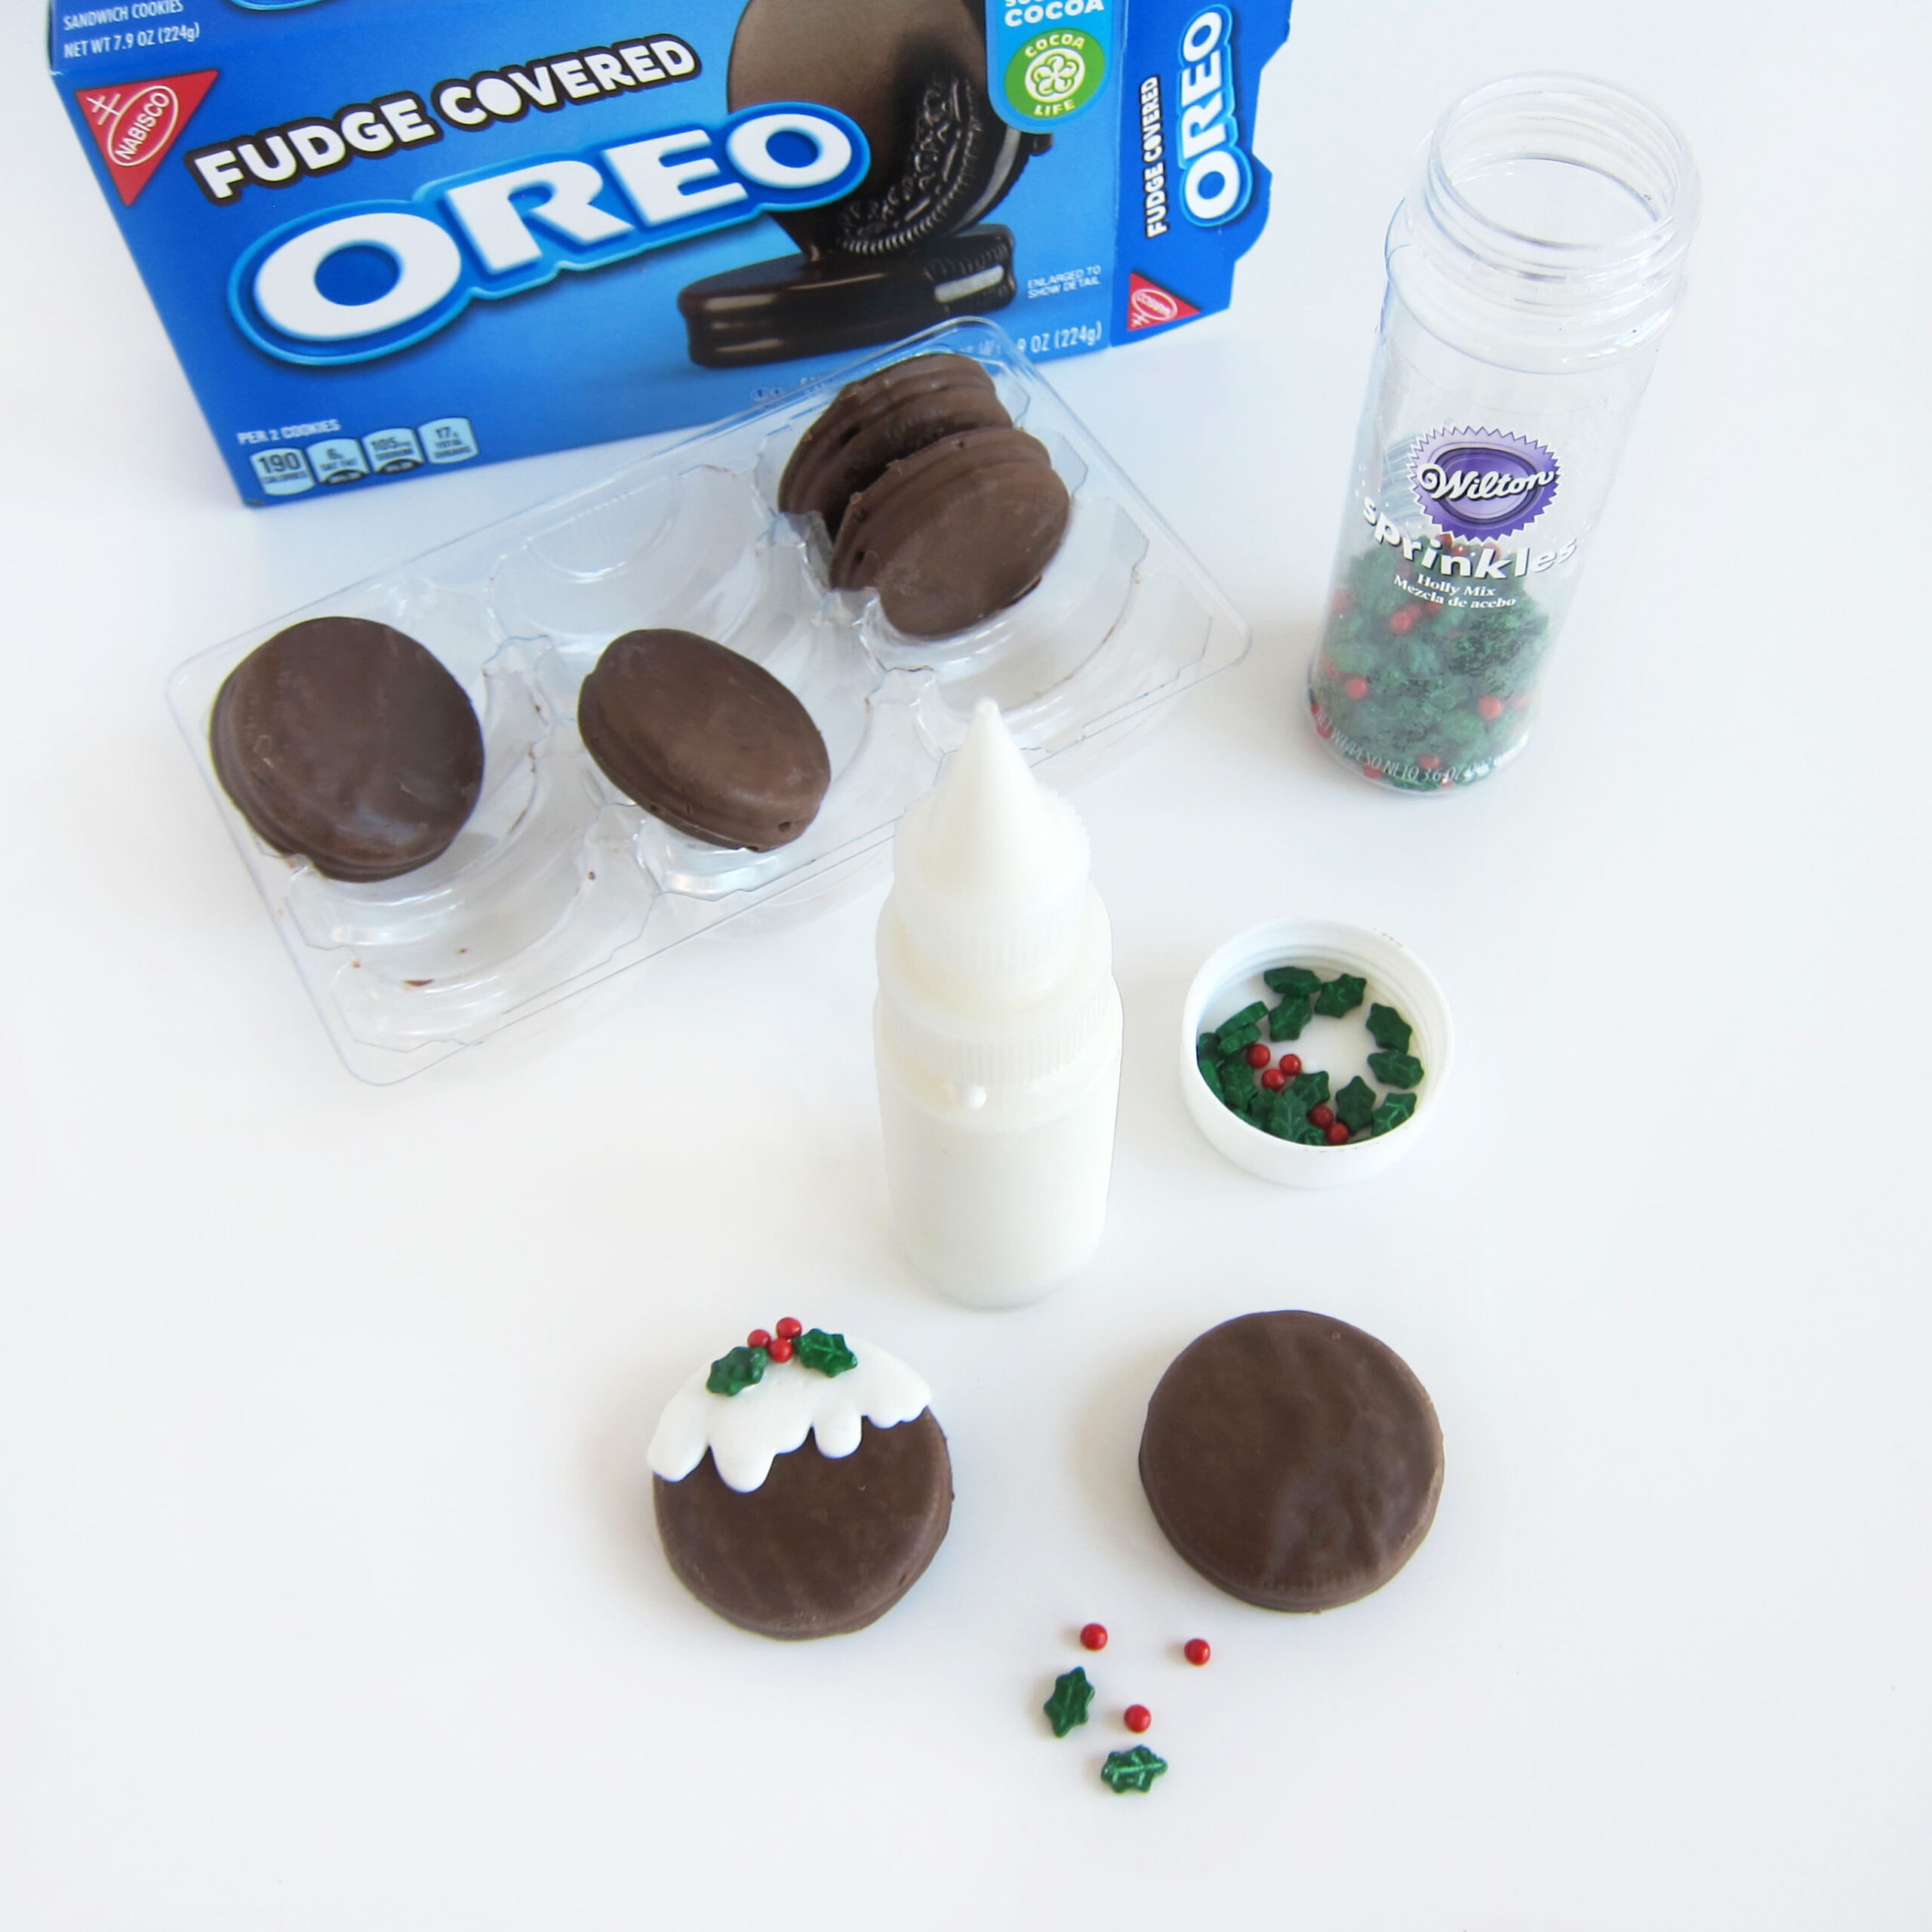 Making Christmas Pudding OREOs using Fudge Covered OREO Cookies, white candy melts, and holly and berries sprinkles.